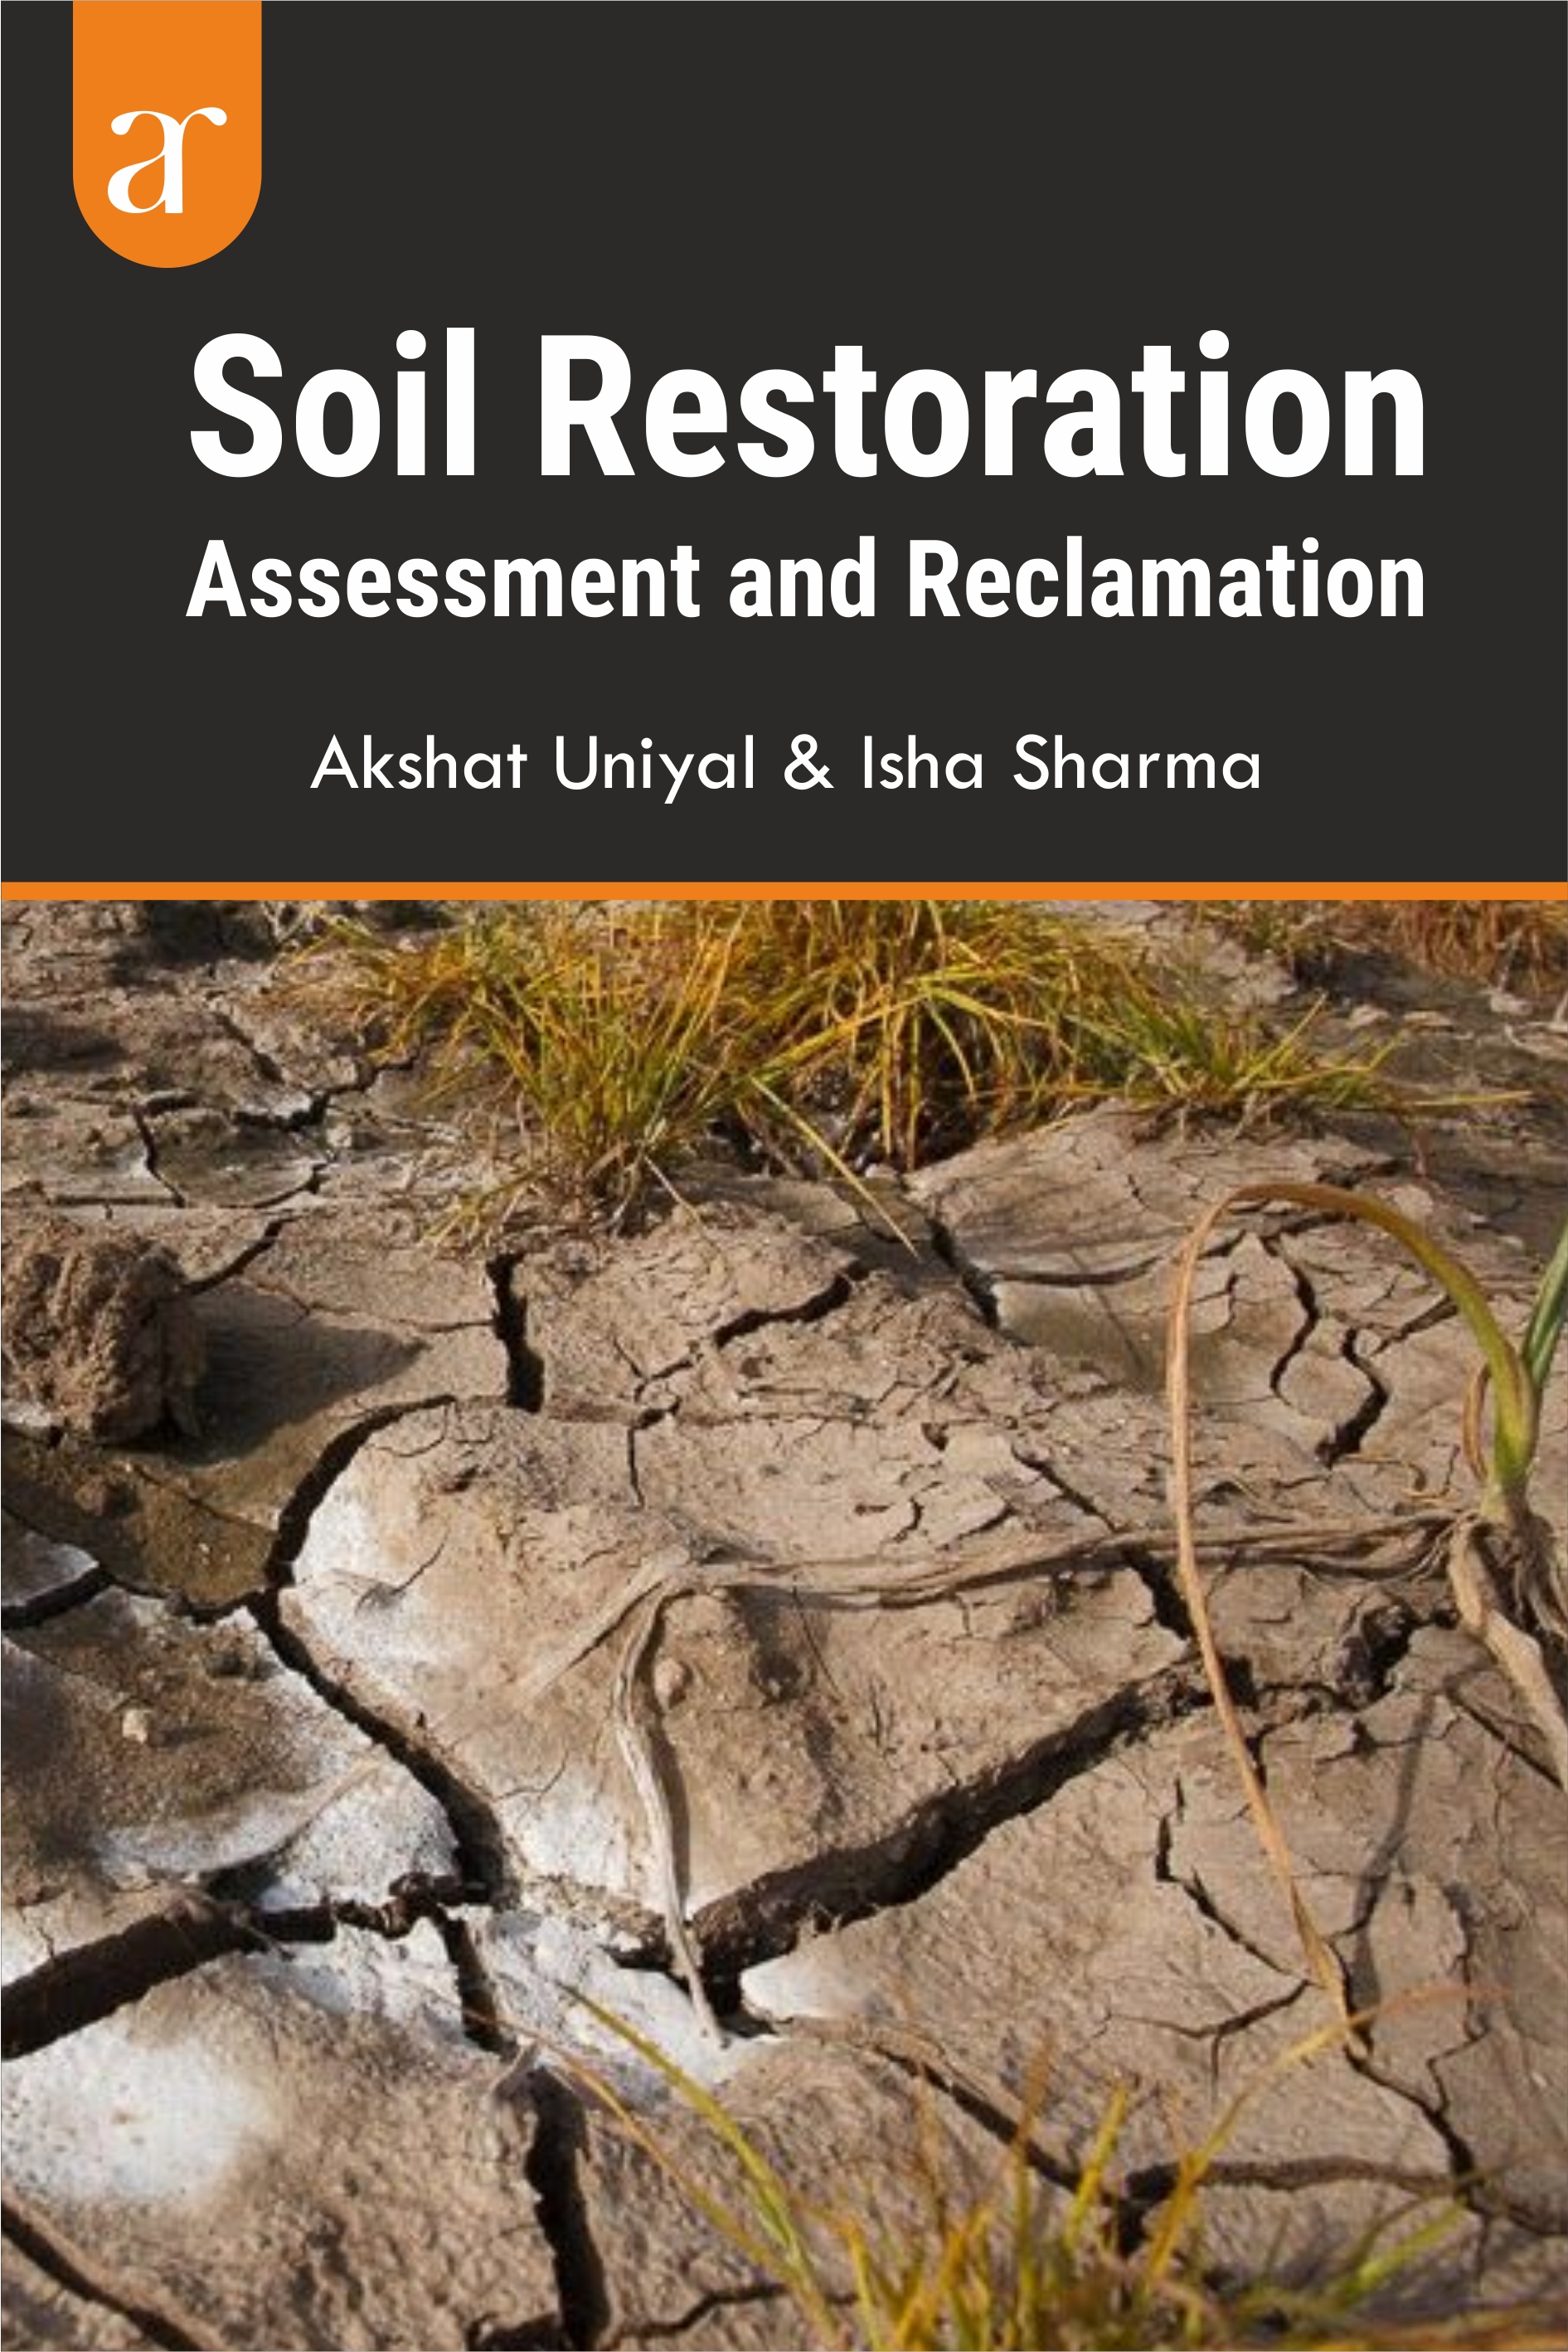 Soil Restoration: Assessment and Reclamation